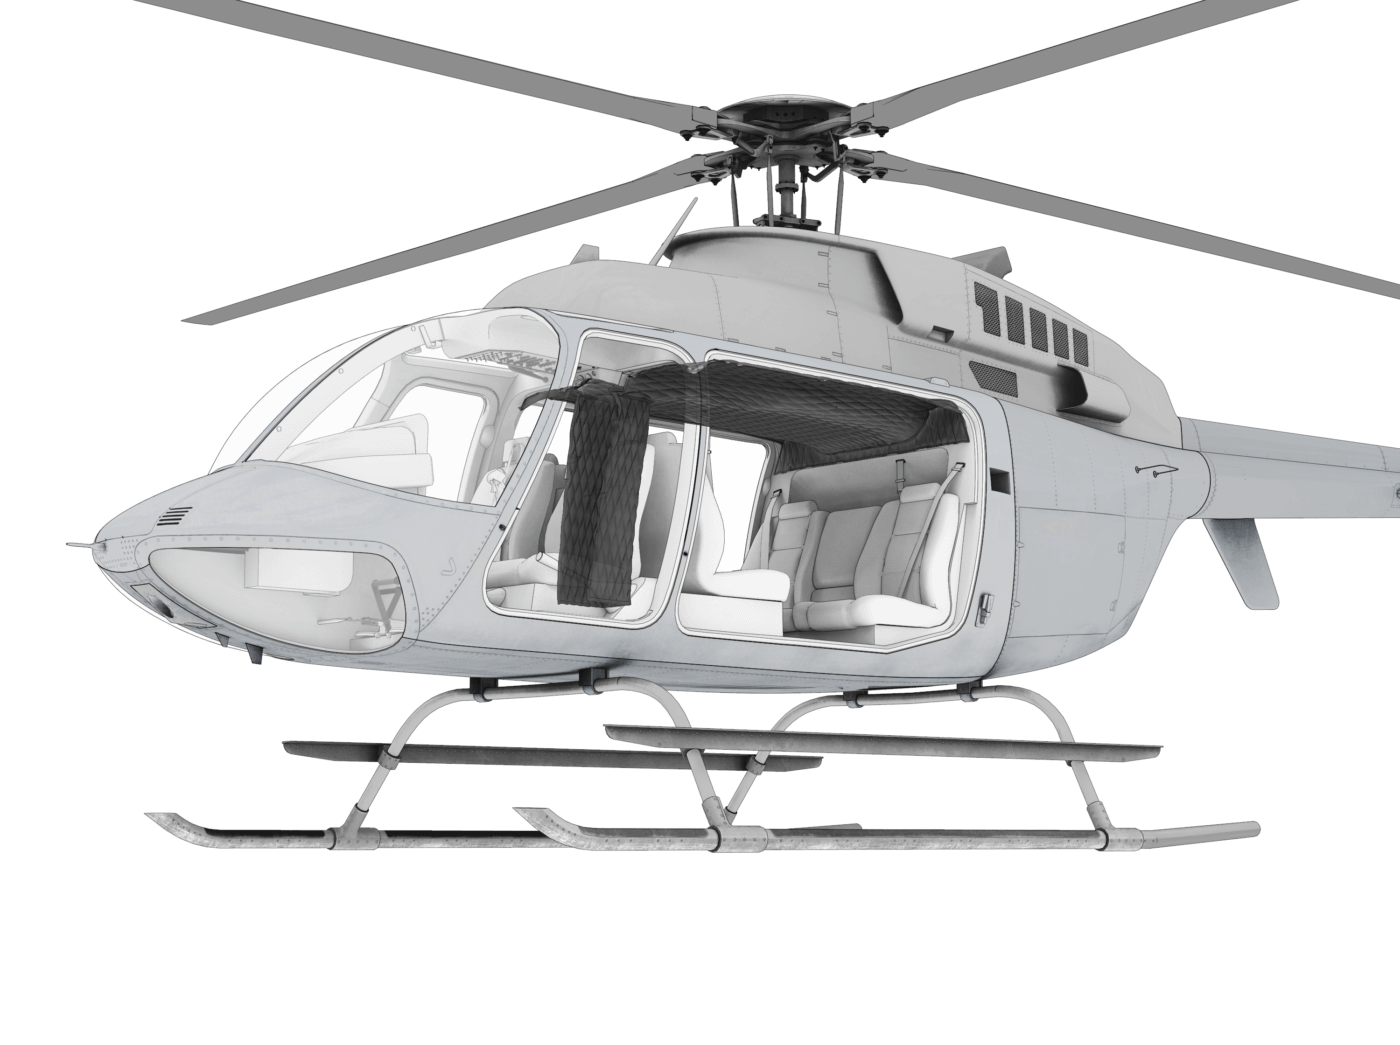 The Aerotex interior wall blanket kit is developed to replace the standard Bell 407, 206L, 206L-1, 206L-3 and 206L-4 cabin interior trim plastics with lightweight blankets. Aerotex Image